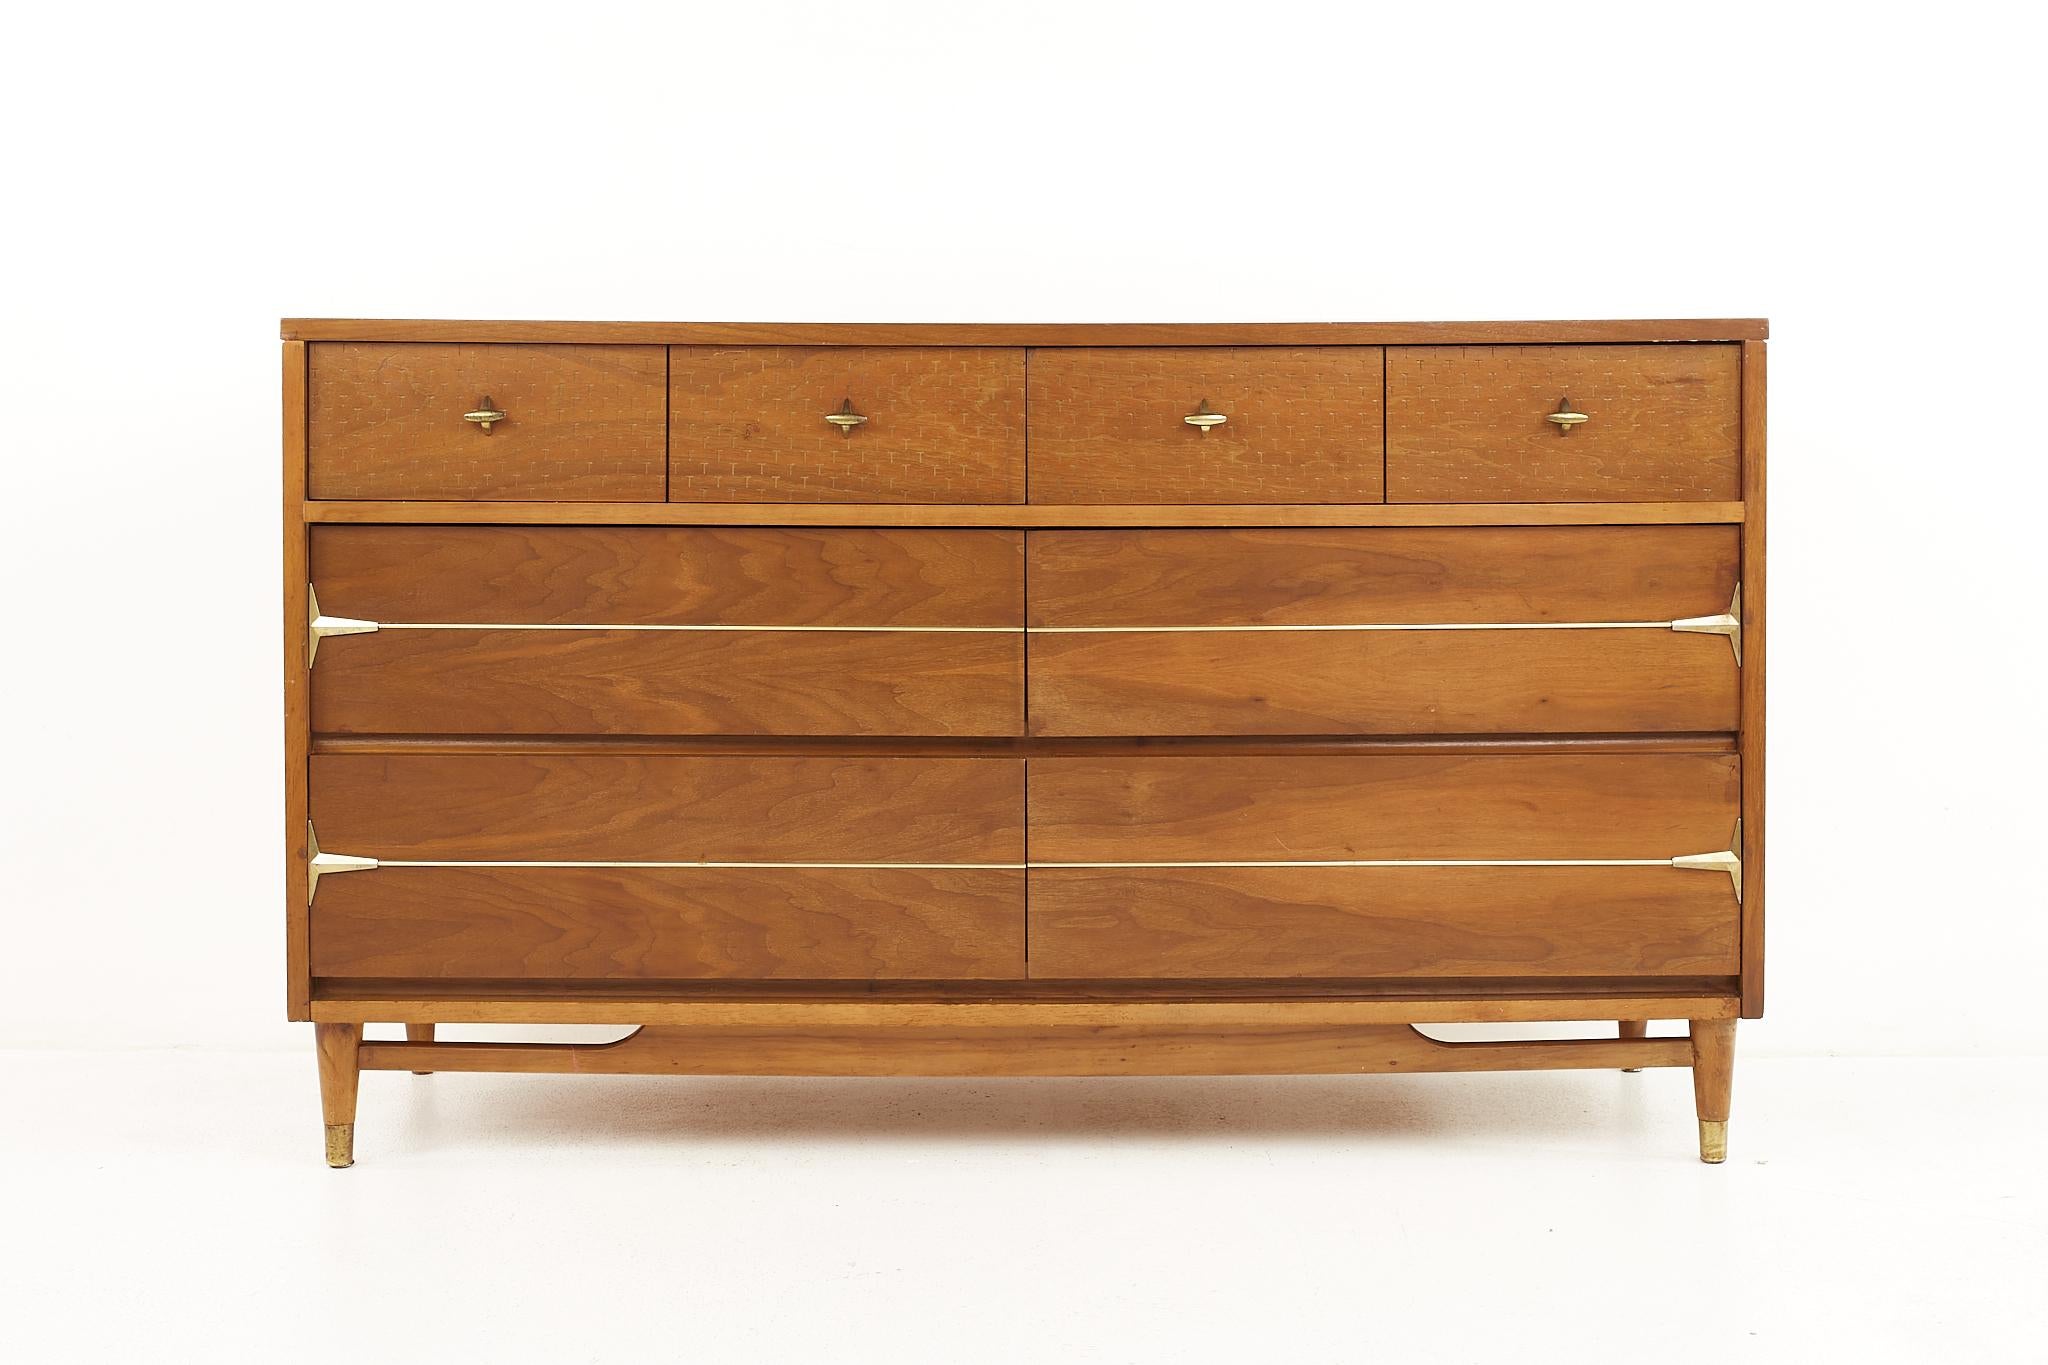 Kroehler Impression mid century walnut and brass 6 drawer lowboy dresser

This dresser measures: 54.5 wide x 18 deep x 31.5 inches high

All pieces of furniture can be had in what we call restored vintage condition. That means the piece is